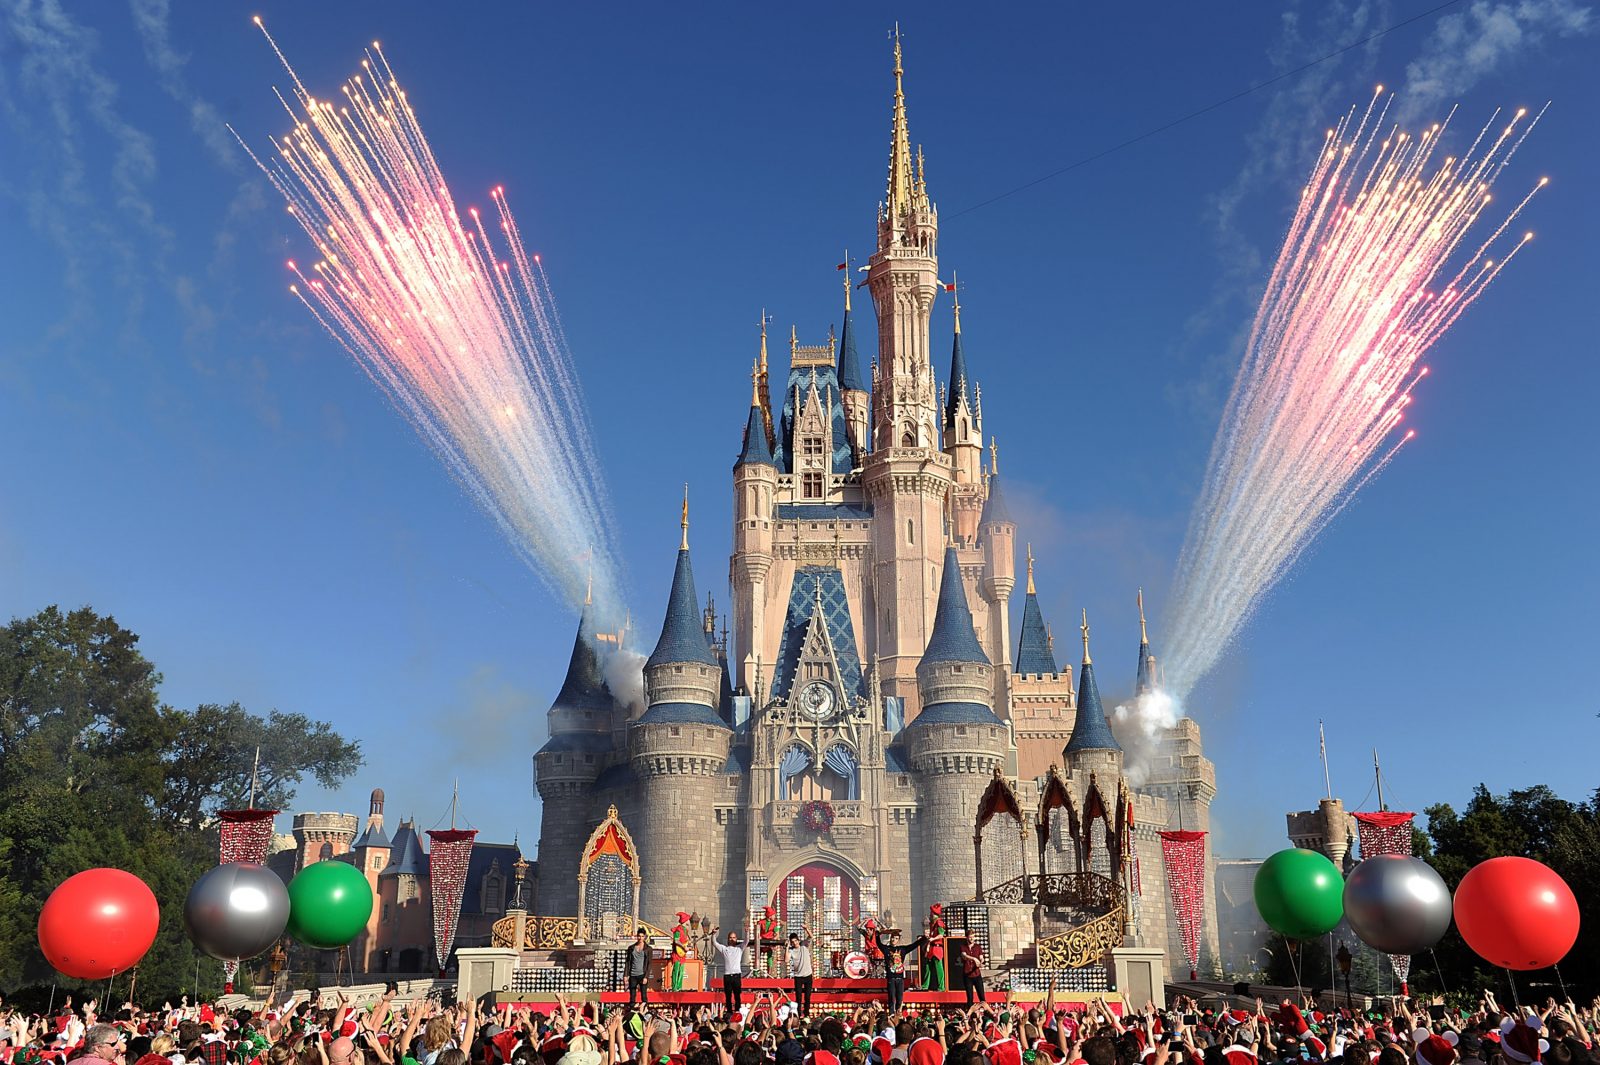 Which Disney Character Are You? Walt Disney World Resort in Orlando, Florida